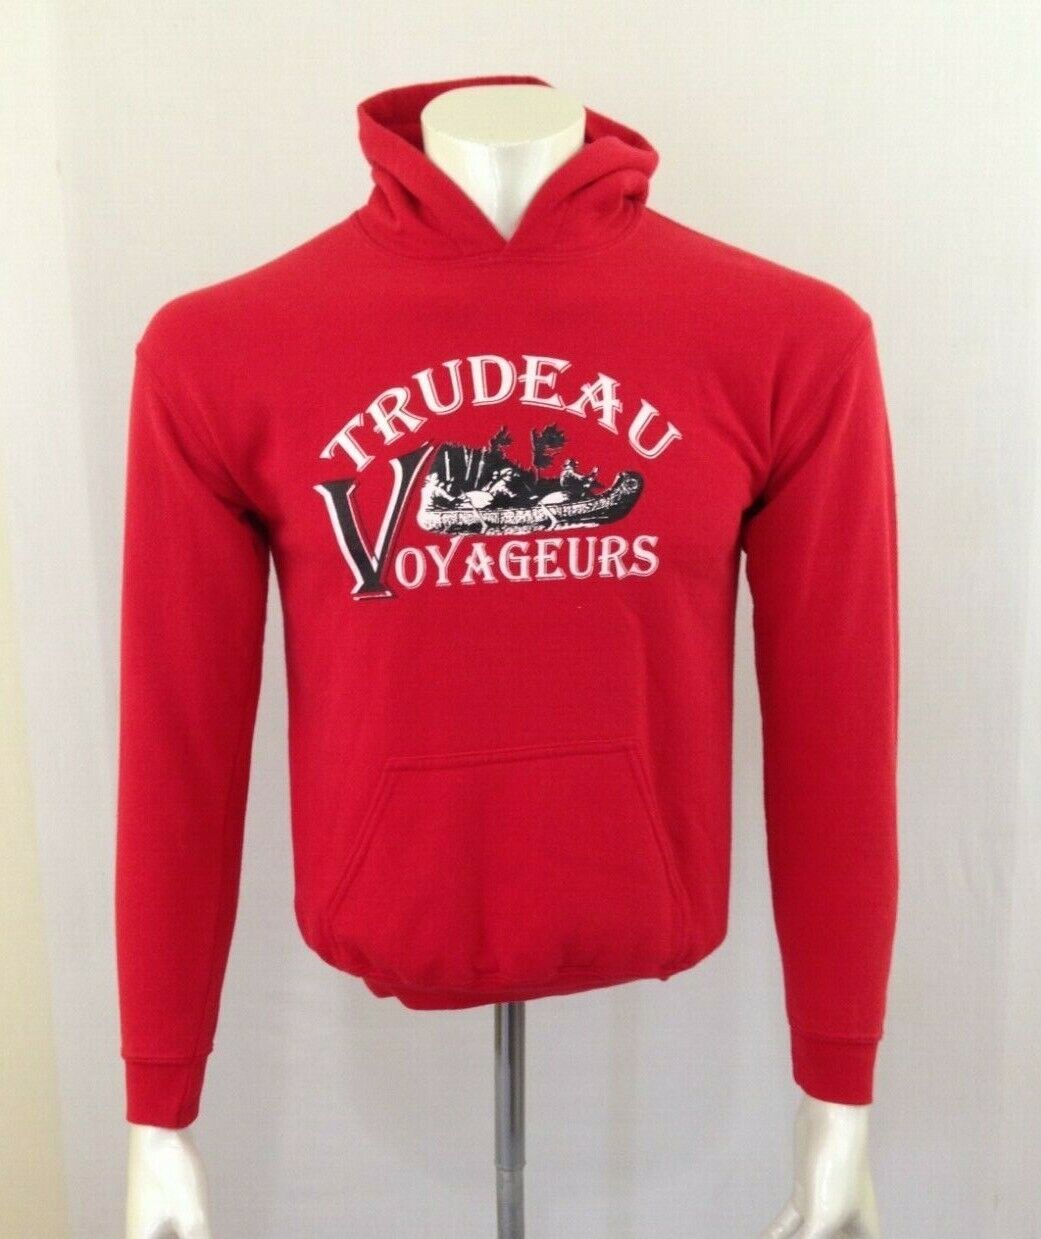 Primary image for Trudeau Voyageurs Hoodie Boys Size L Red Graphic Long Sleeve Hooded Sweatshirt 